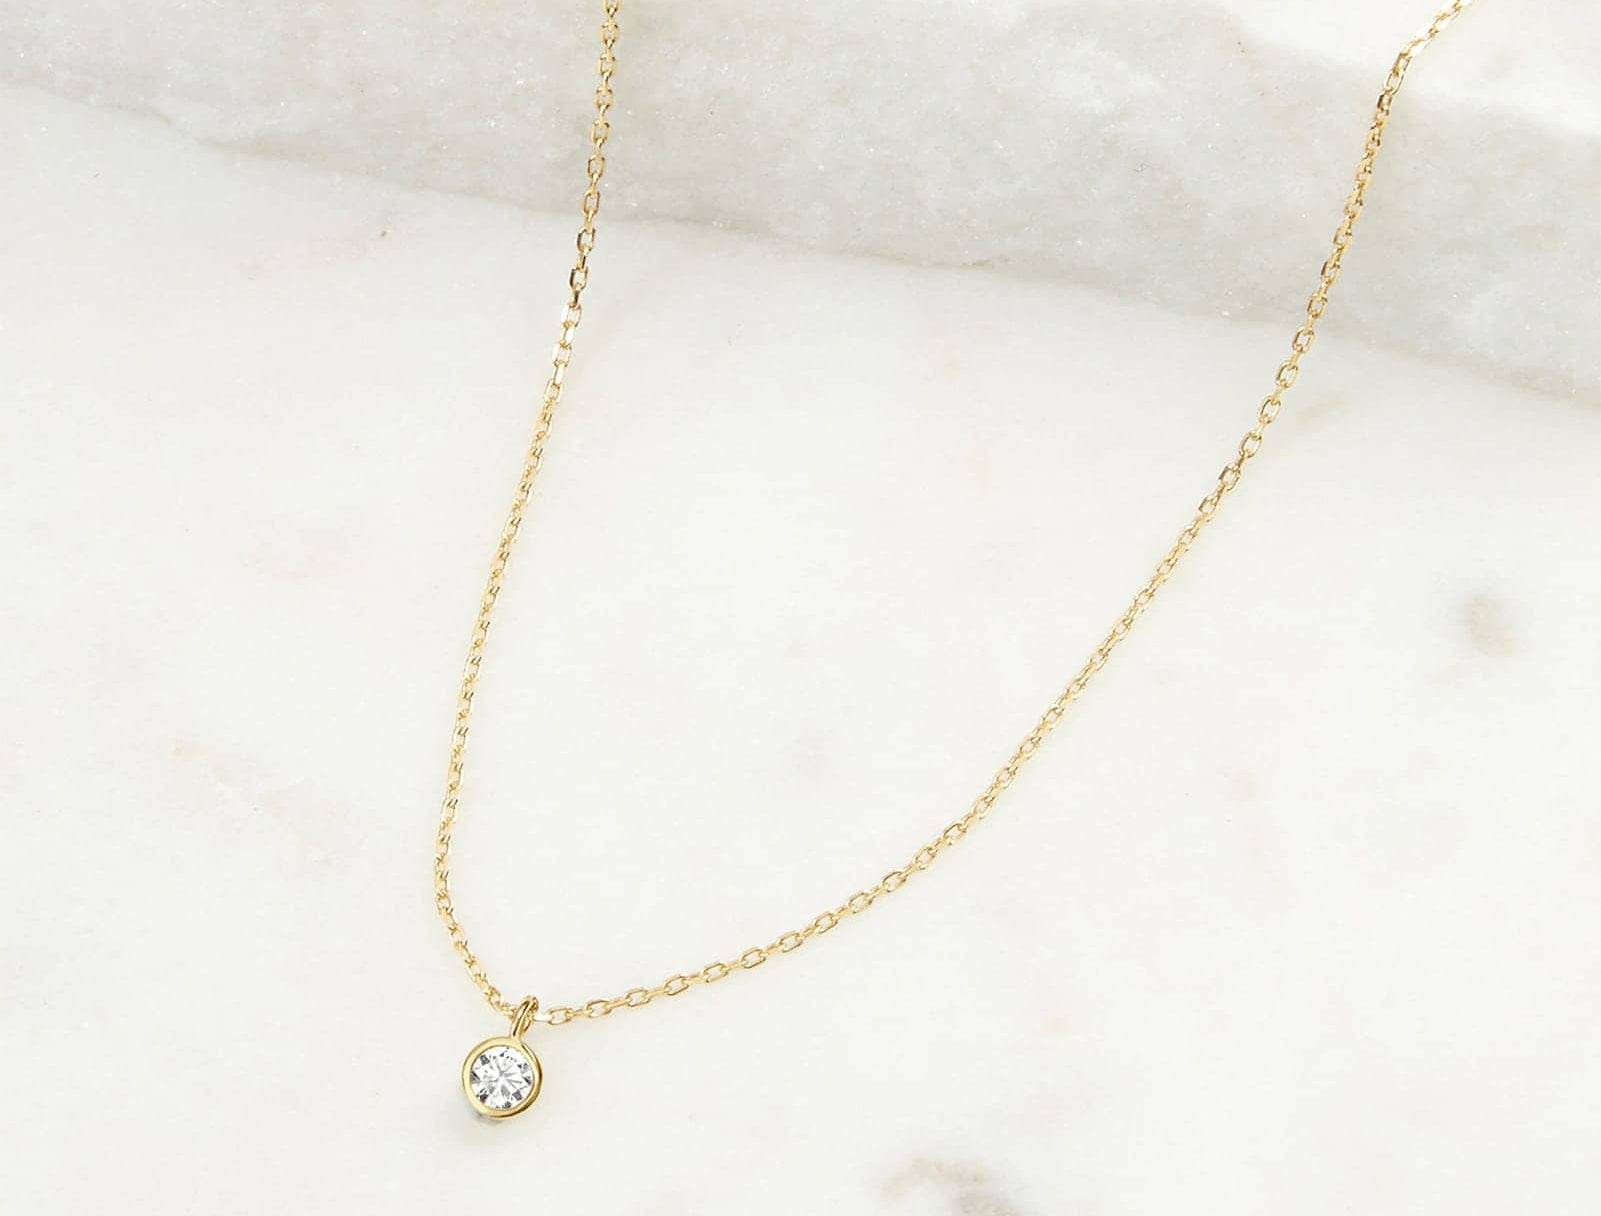 Picture of  Luna Rae solid 9k gold Diamond Sky Necklace